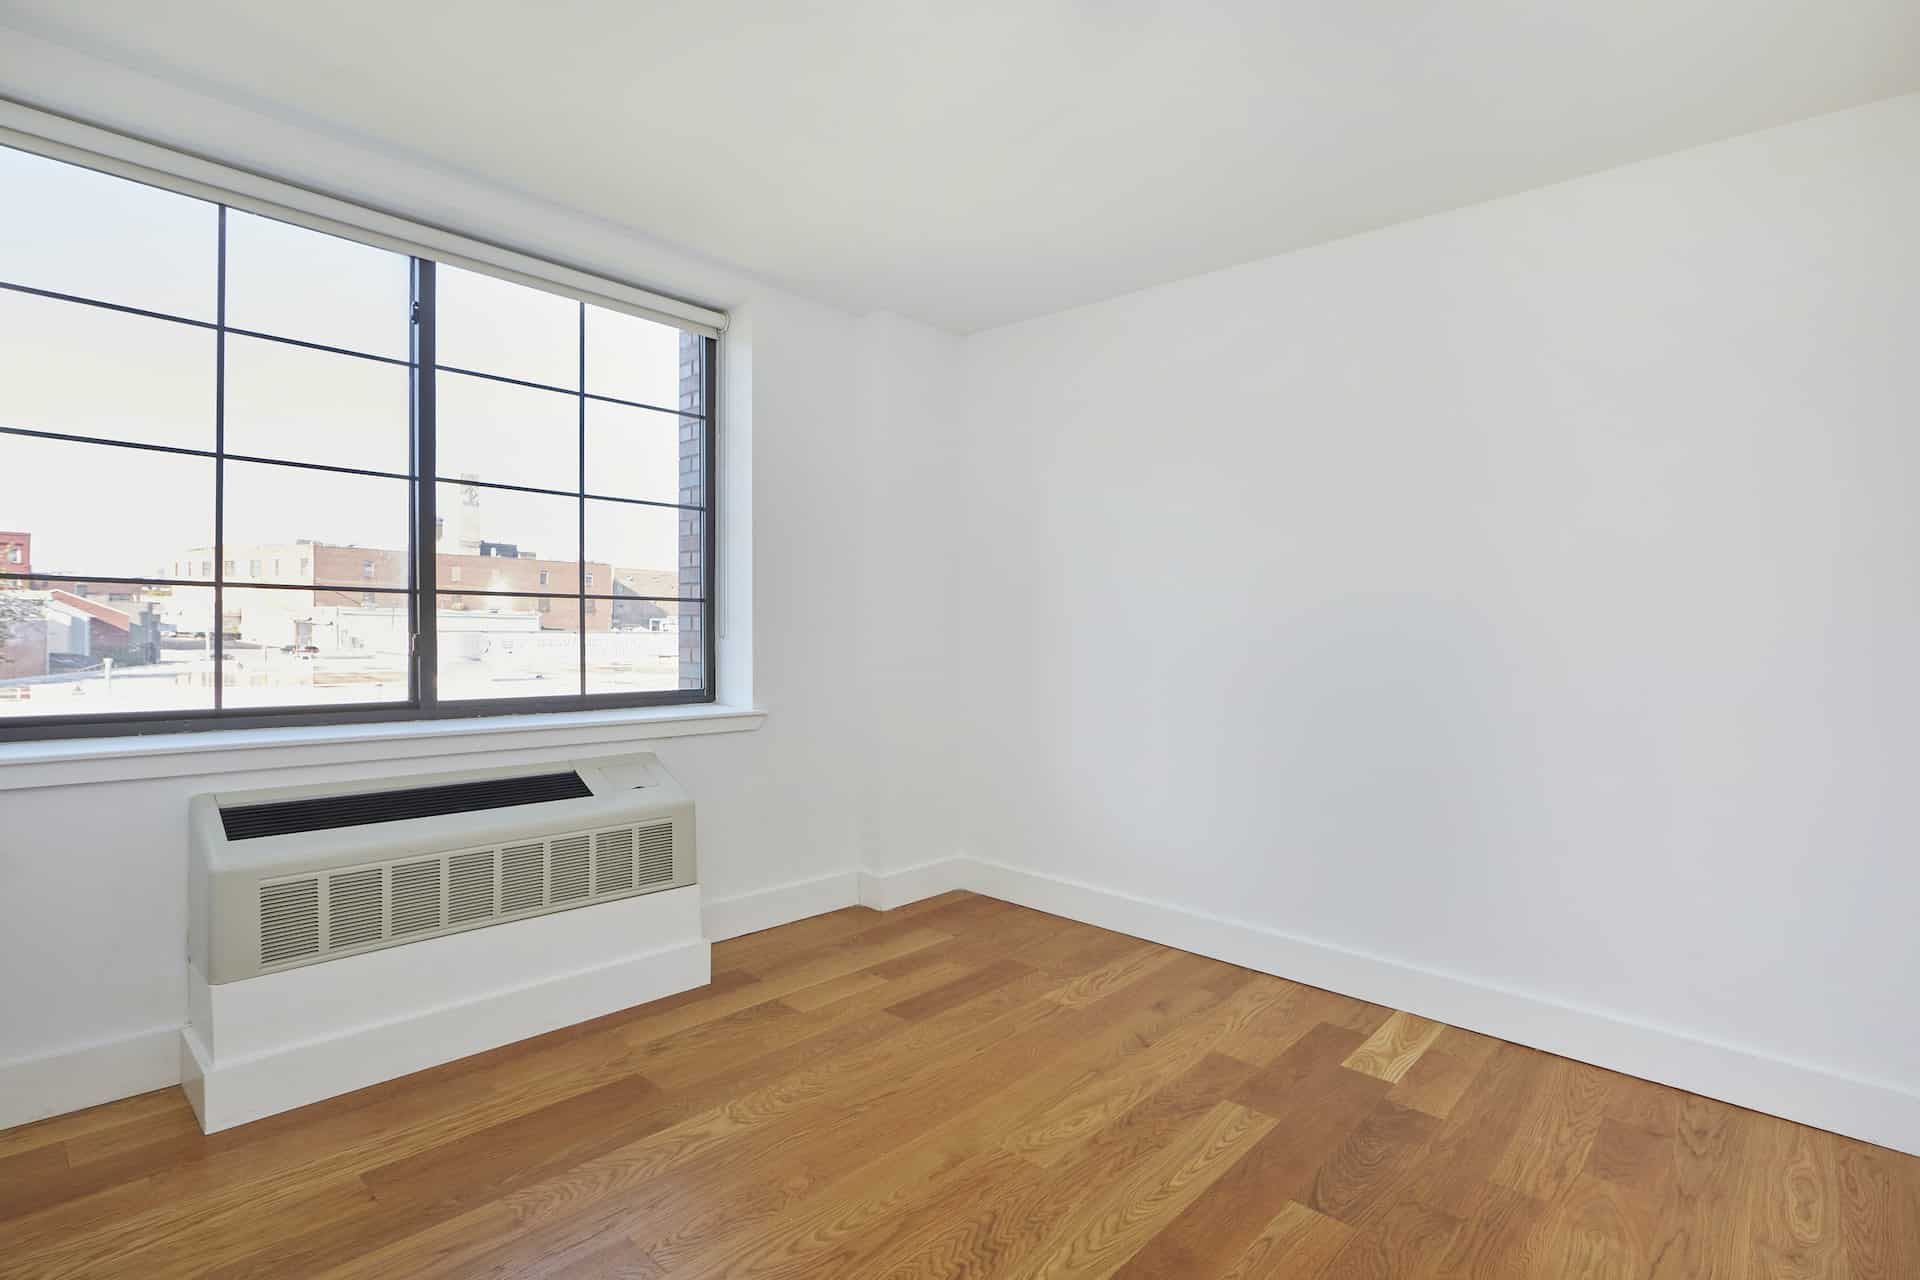 Living room at 83 Bushwick Place apartments in Brooklyn with hardwood floors, floor mounted a/c unit and large windows.